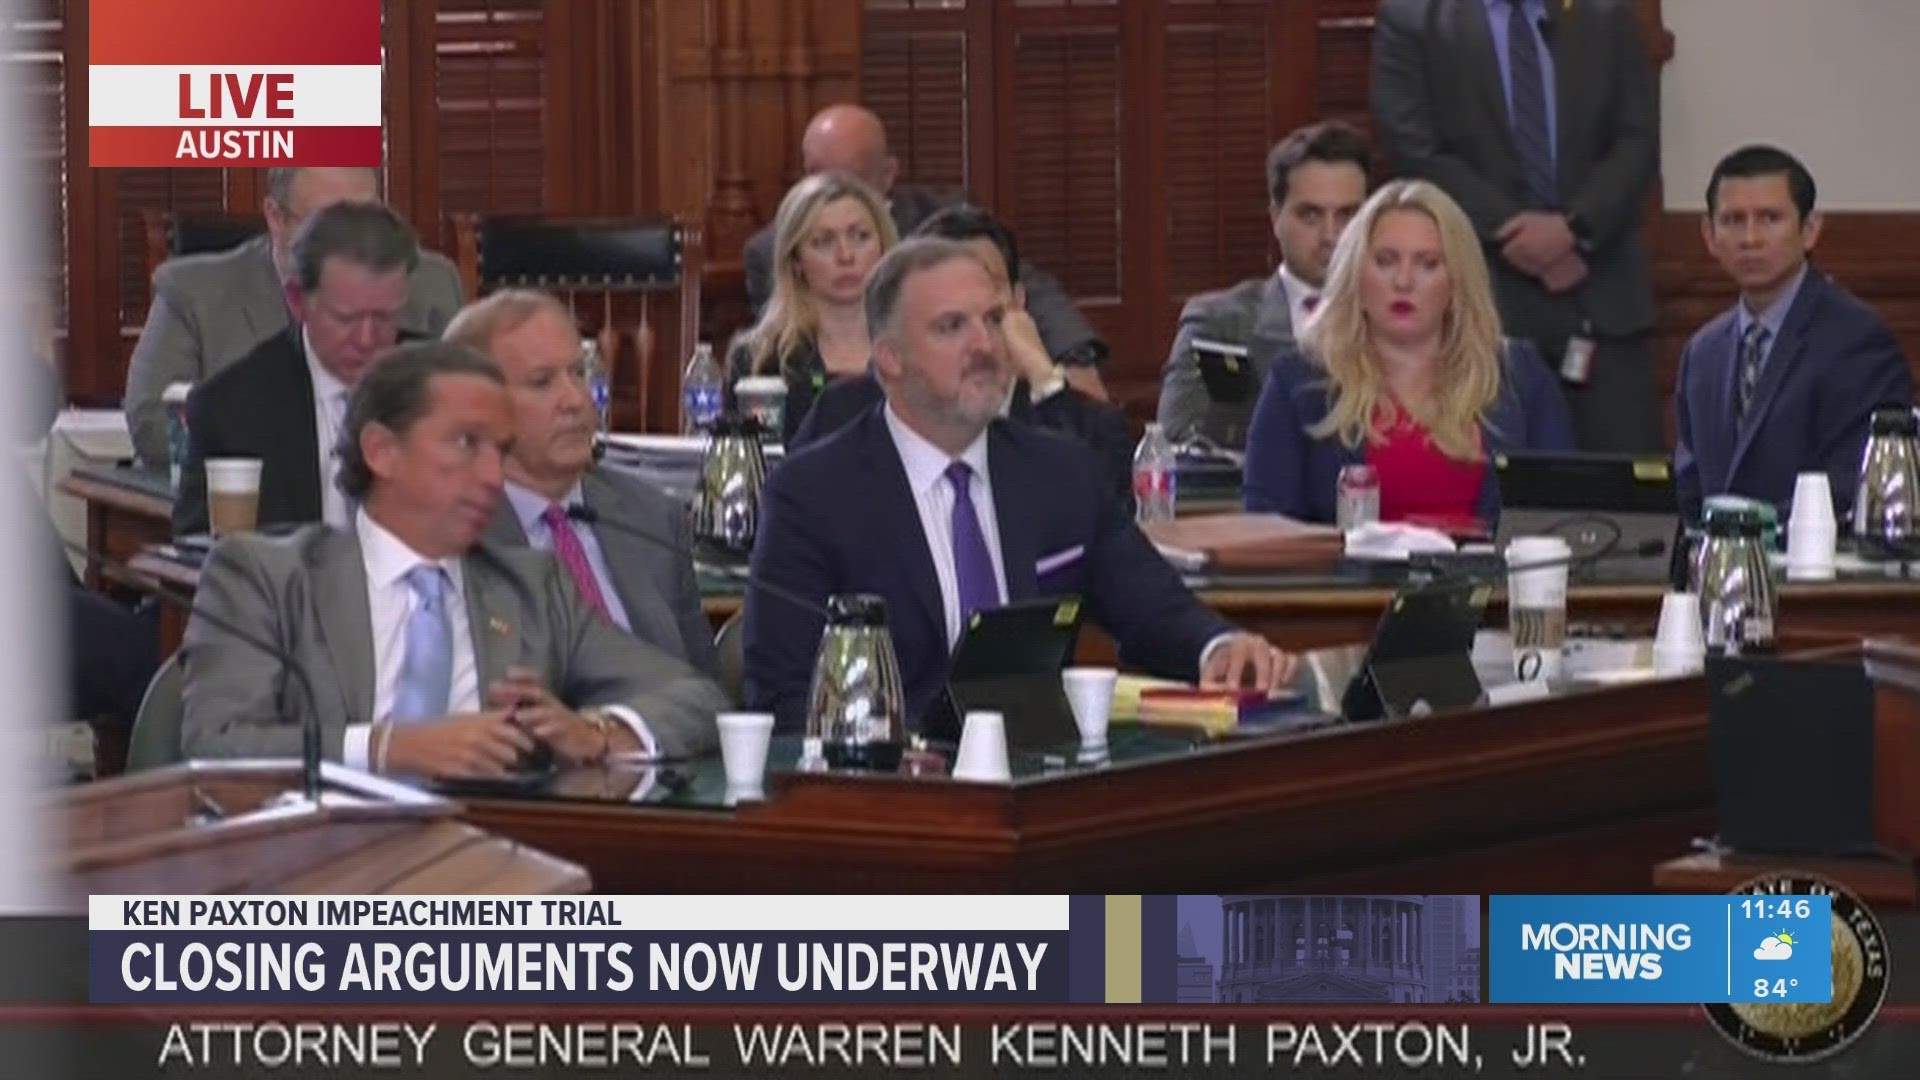 Buzbee claimed Rep. Leach was improperly giving testimony during closing arguments in the impeachment trial of suspended Attorney General Ken Paxton.